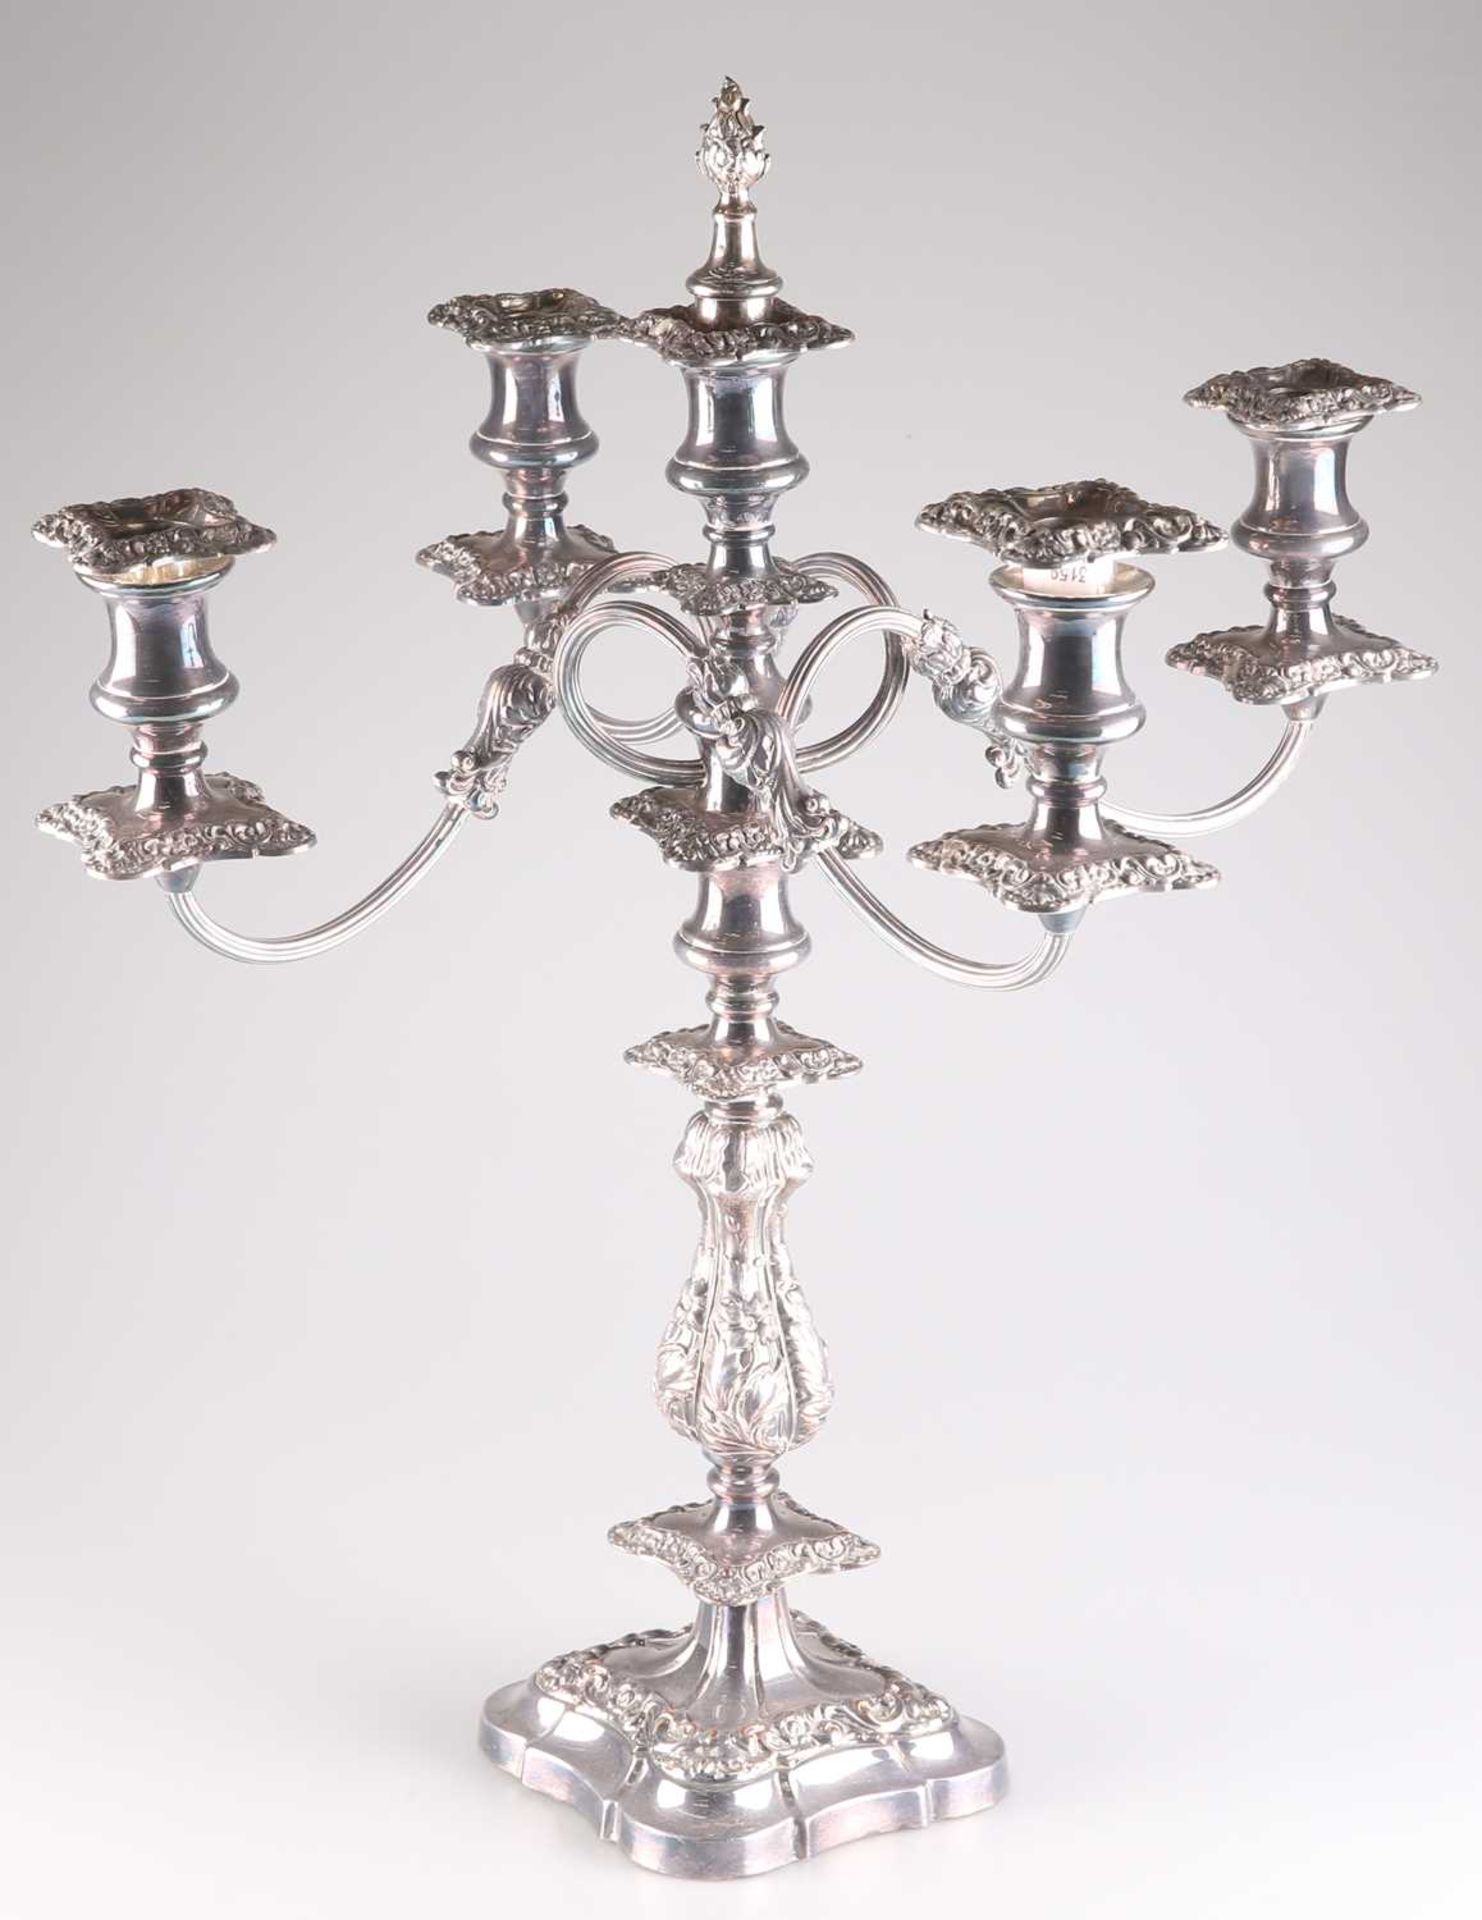 A LARGE 19TH CENTURY SILVER-PLATED CANDELABRUM